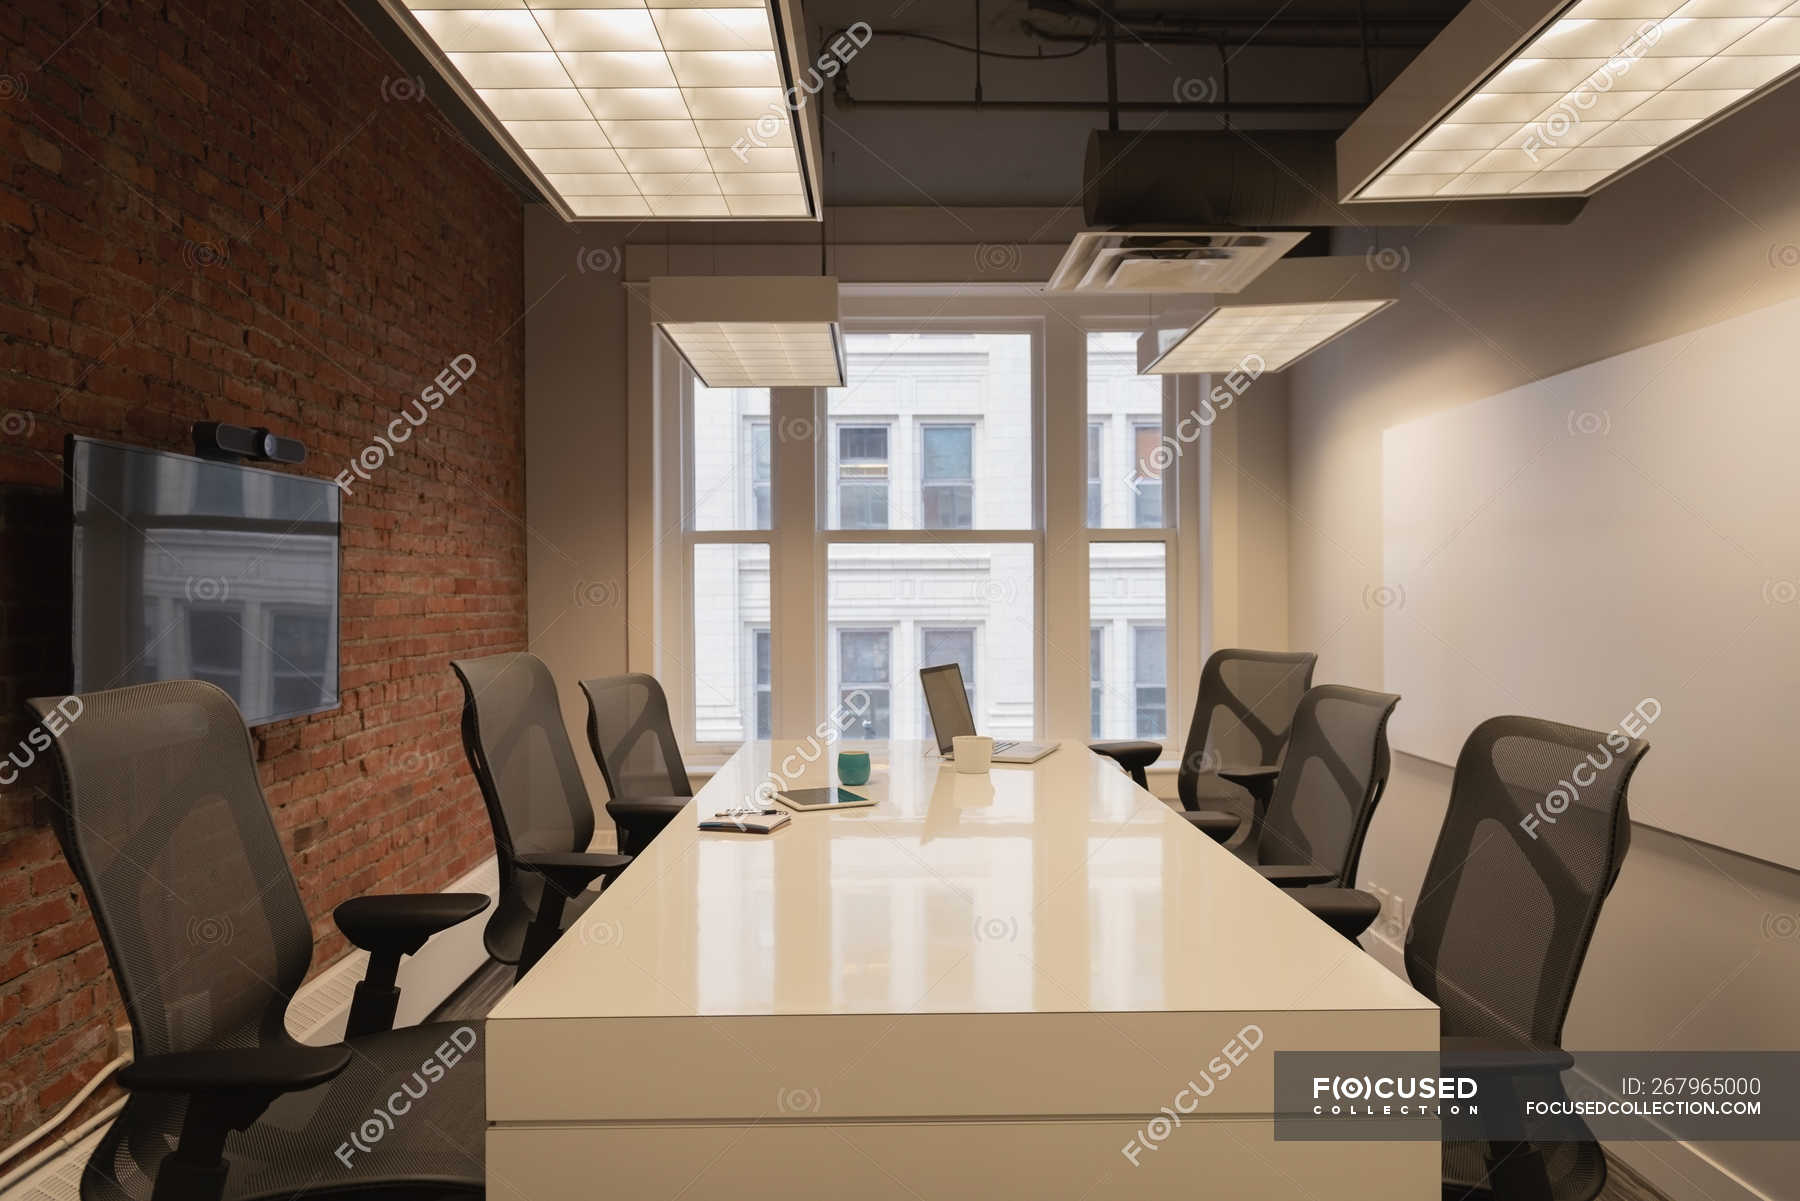 Empty Chairs And Table At Conference Room In Office Discussion Entrepreneur Stock Photo 267965000